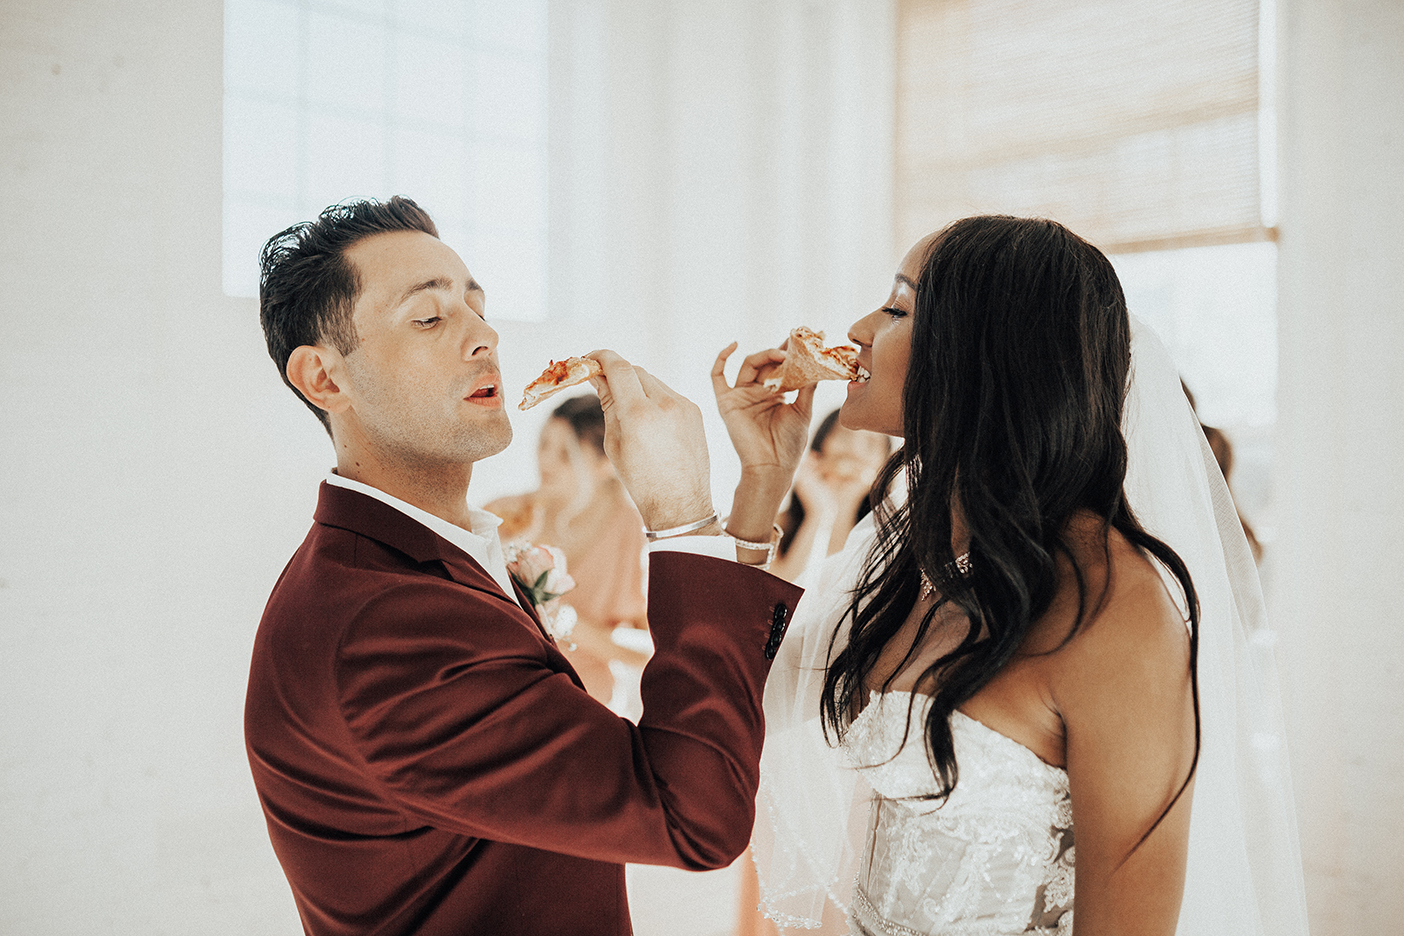 Bride and groom enjoying a slice of pizza at their reception.